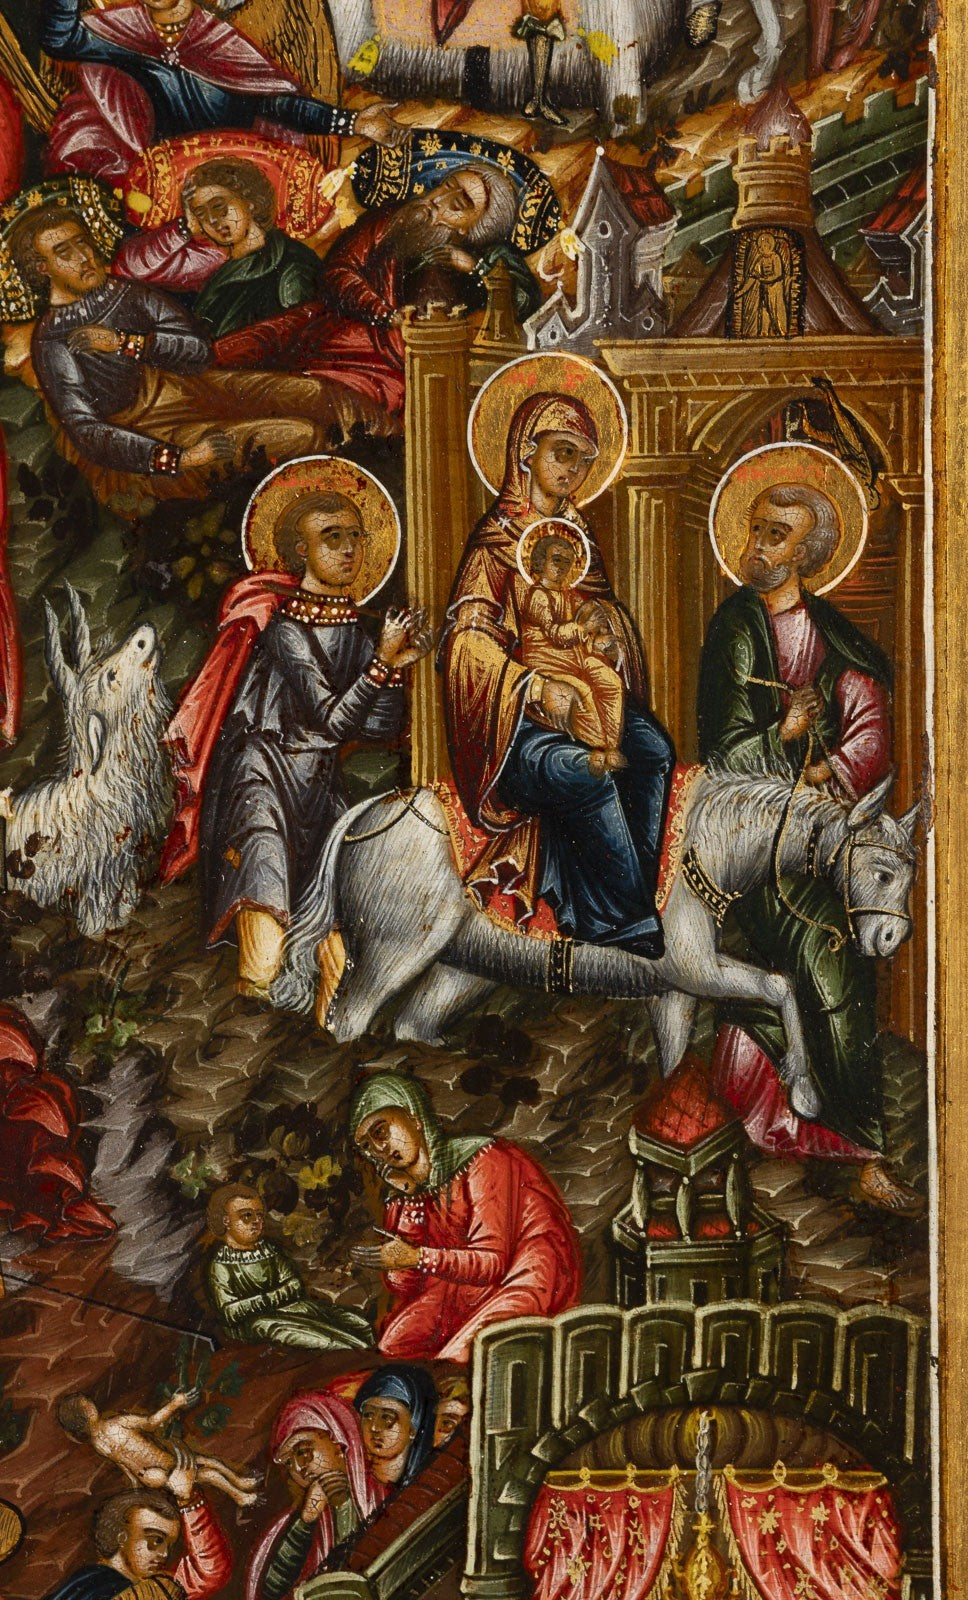 The icon of the Nativity of Jesus Christ